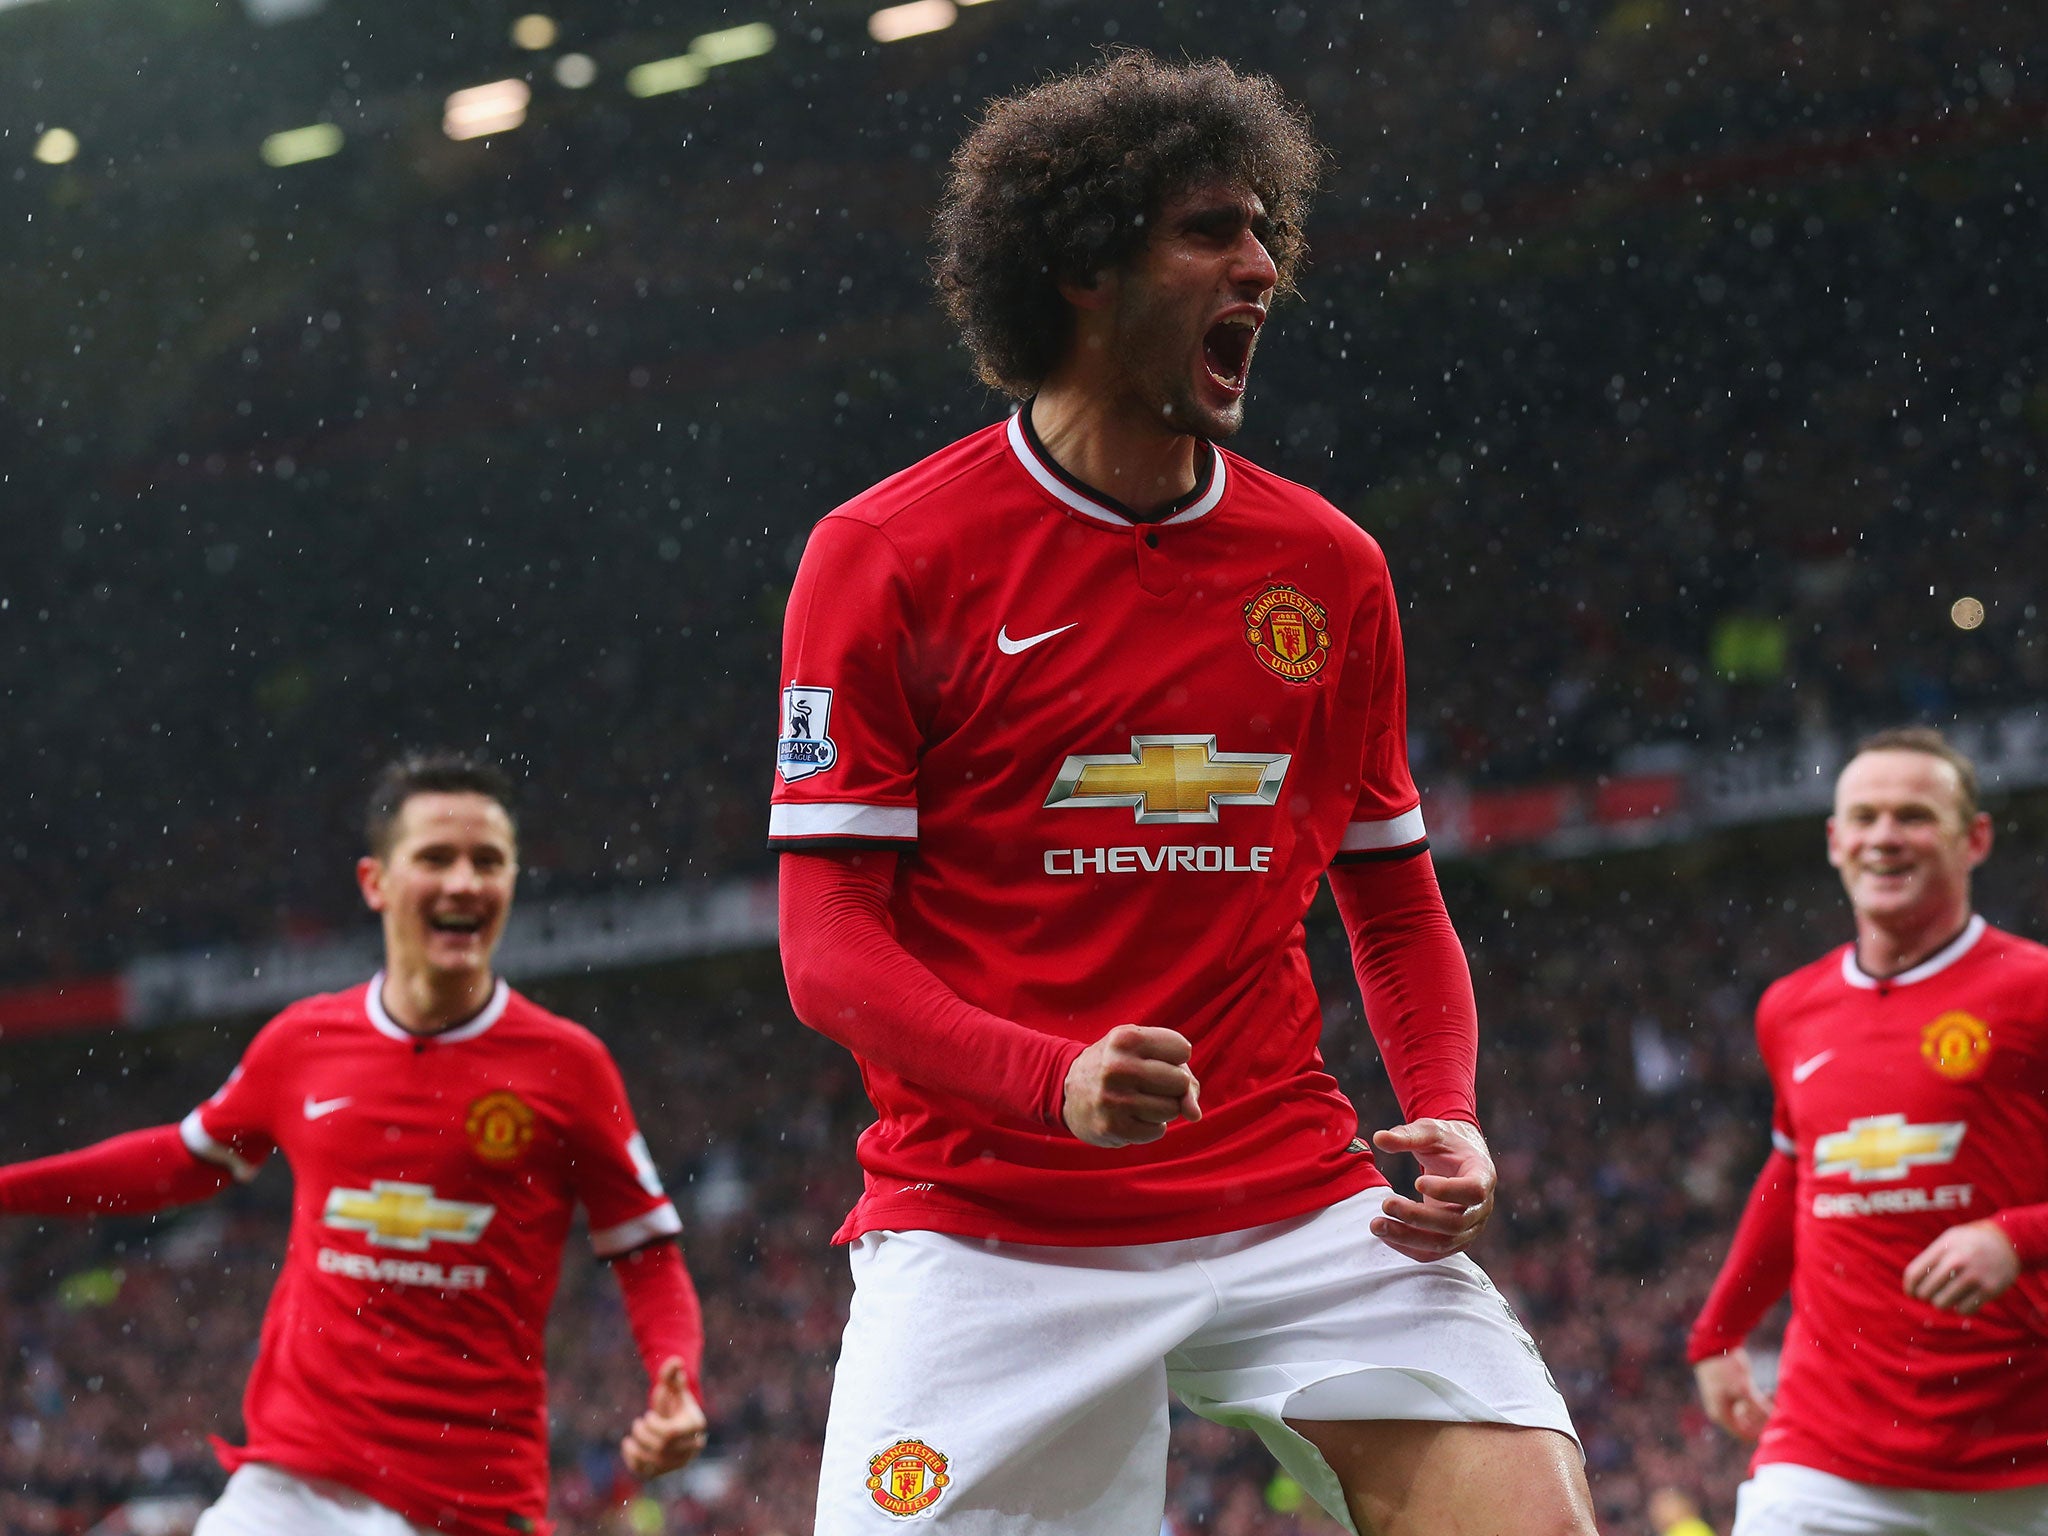 Marouane Fellaini celebrates after scoring United's second goal with a powerful header in their 4-2 win over City in the Manchester derby at Old Trafford